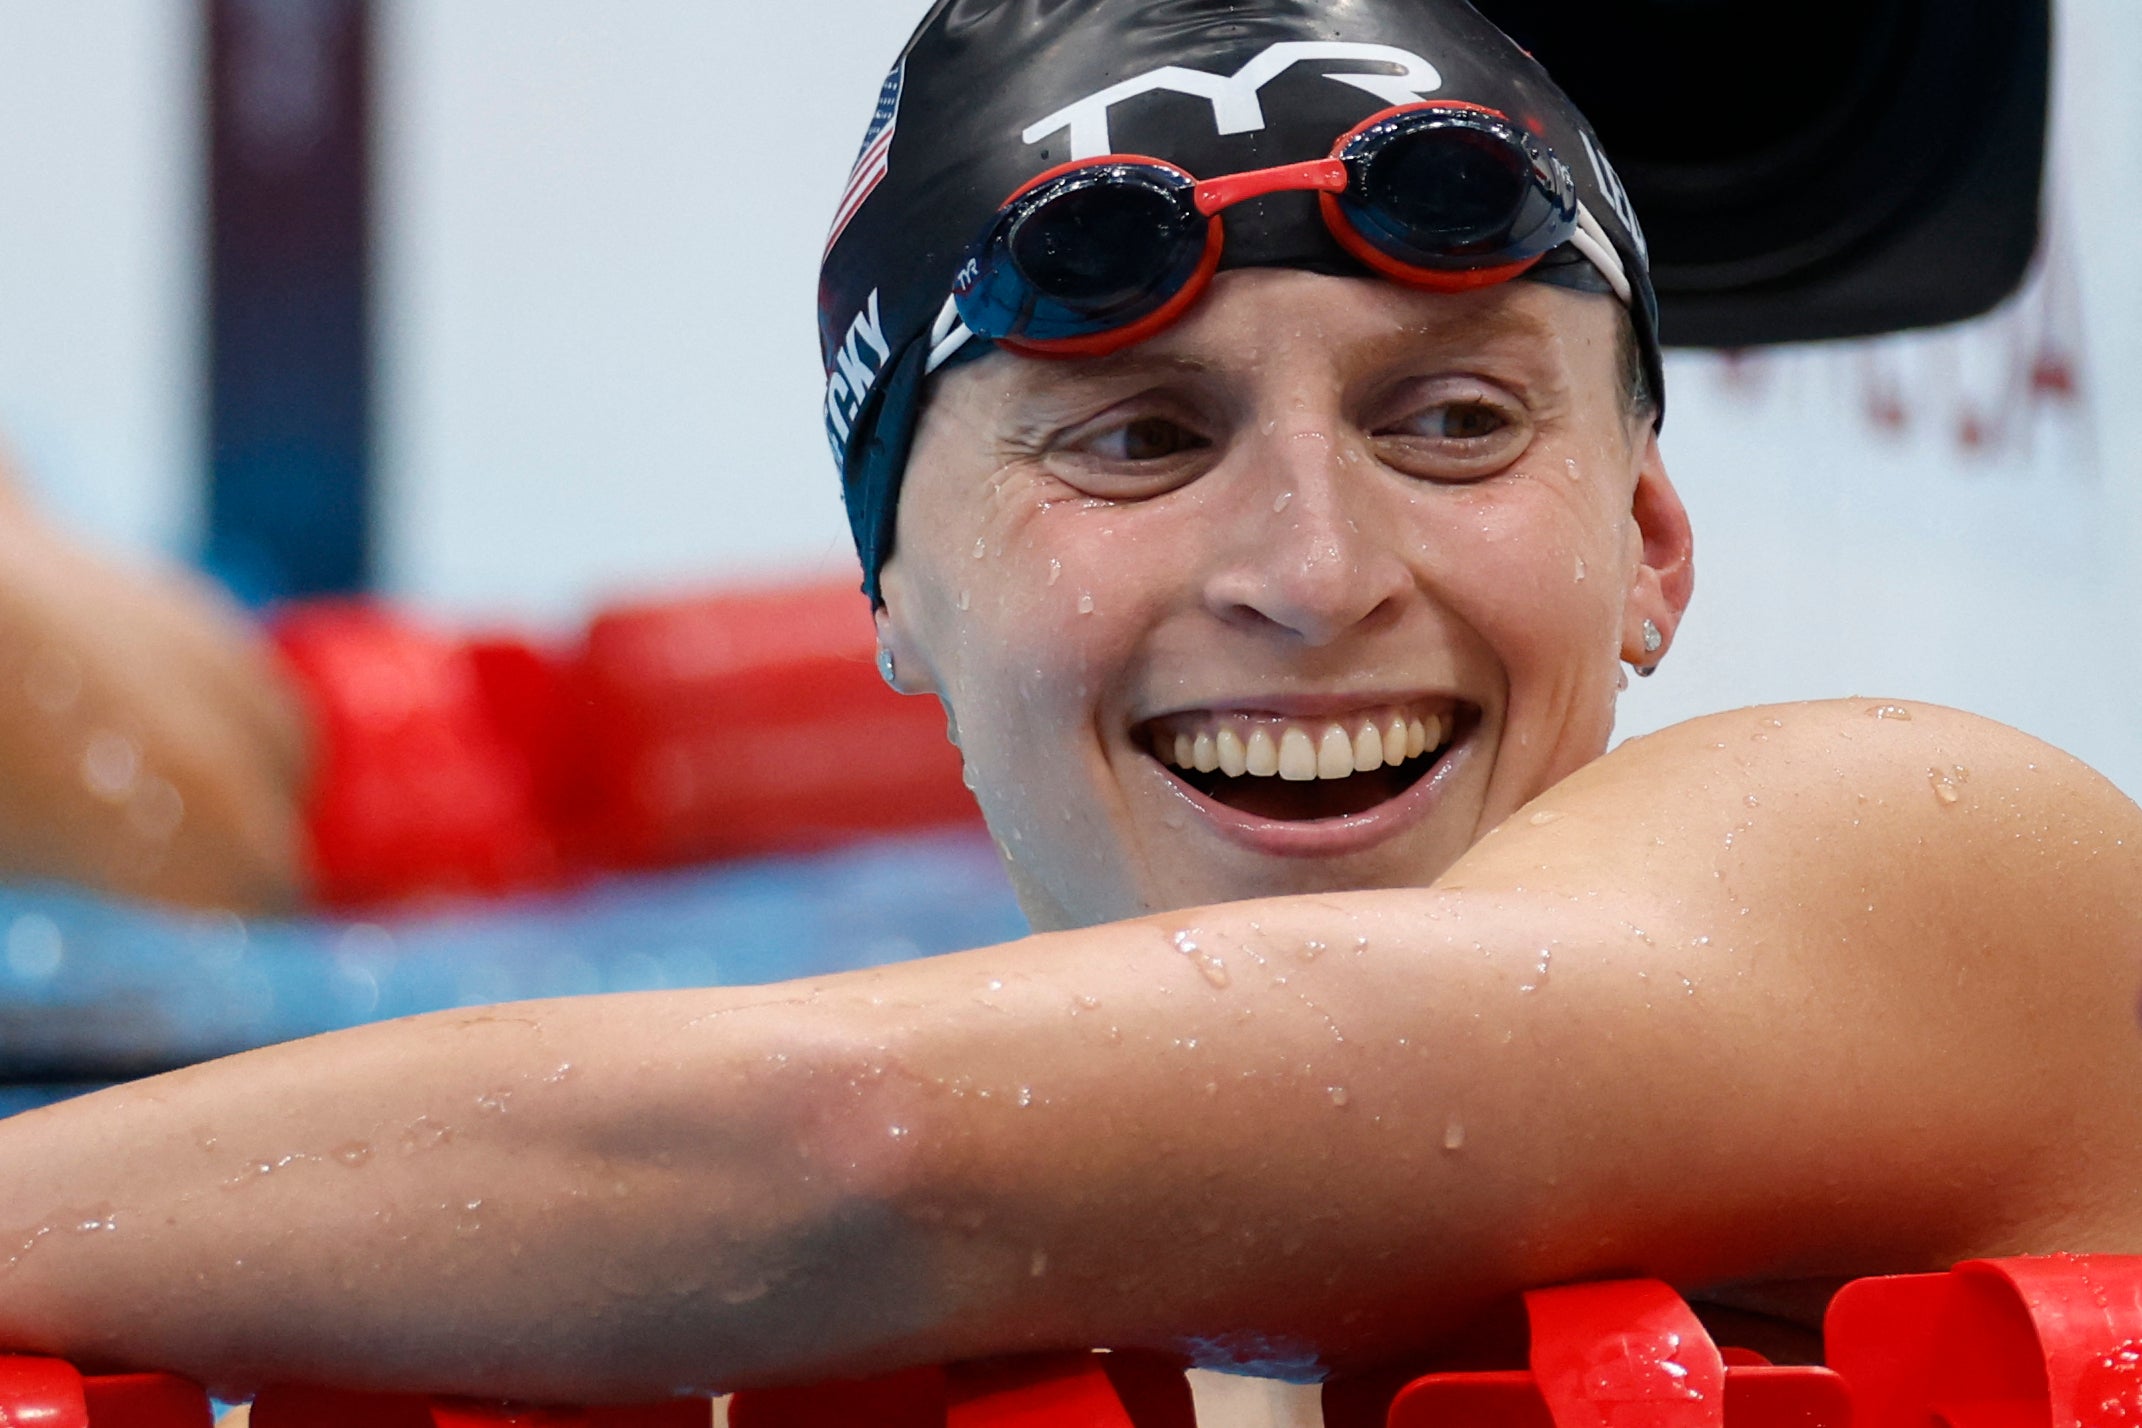 USA's Katie Ledecky reacts after winning gold in the final of the women's 800m freestyle swimming event during the Tokyo 2020 Olympic Games at the Tokyo Aquatics Centre in Tokyo on July 31, 2021.